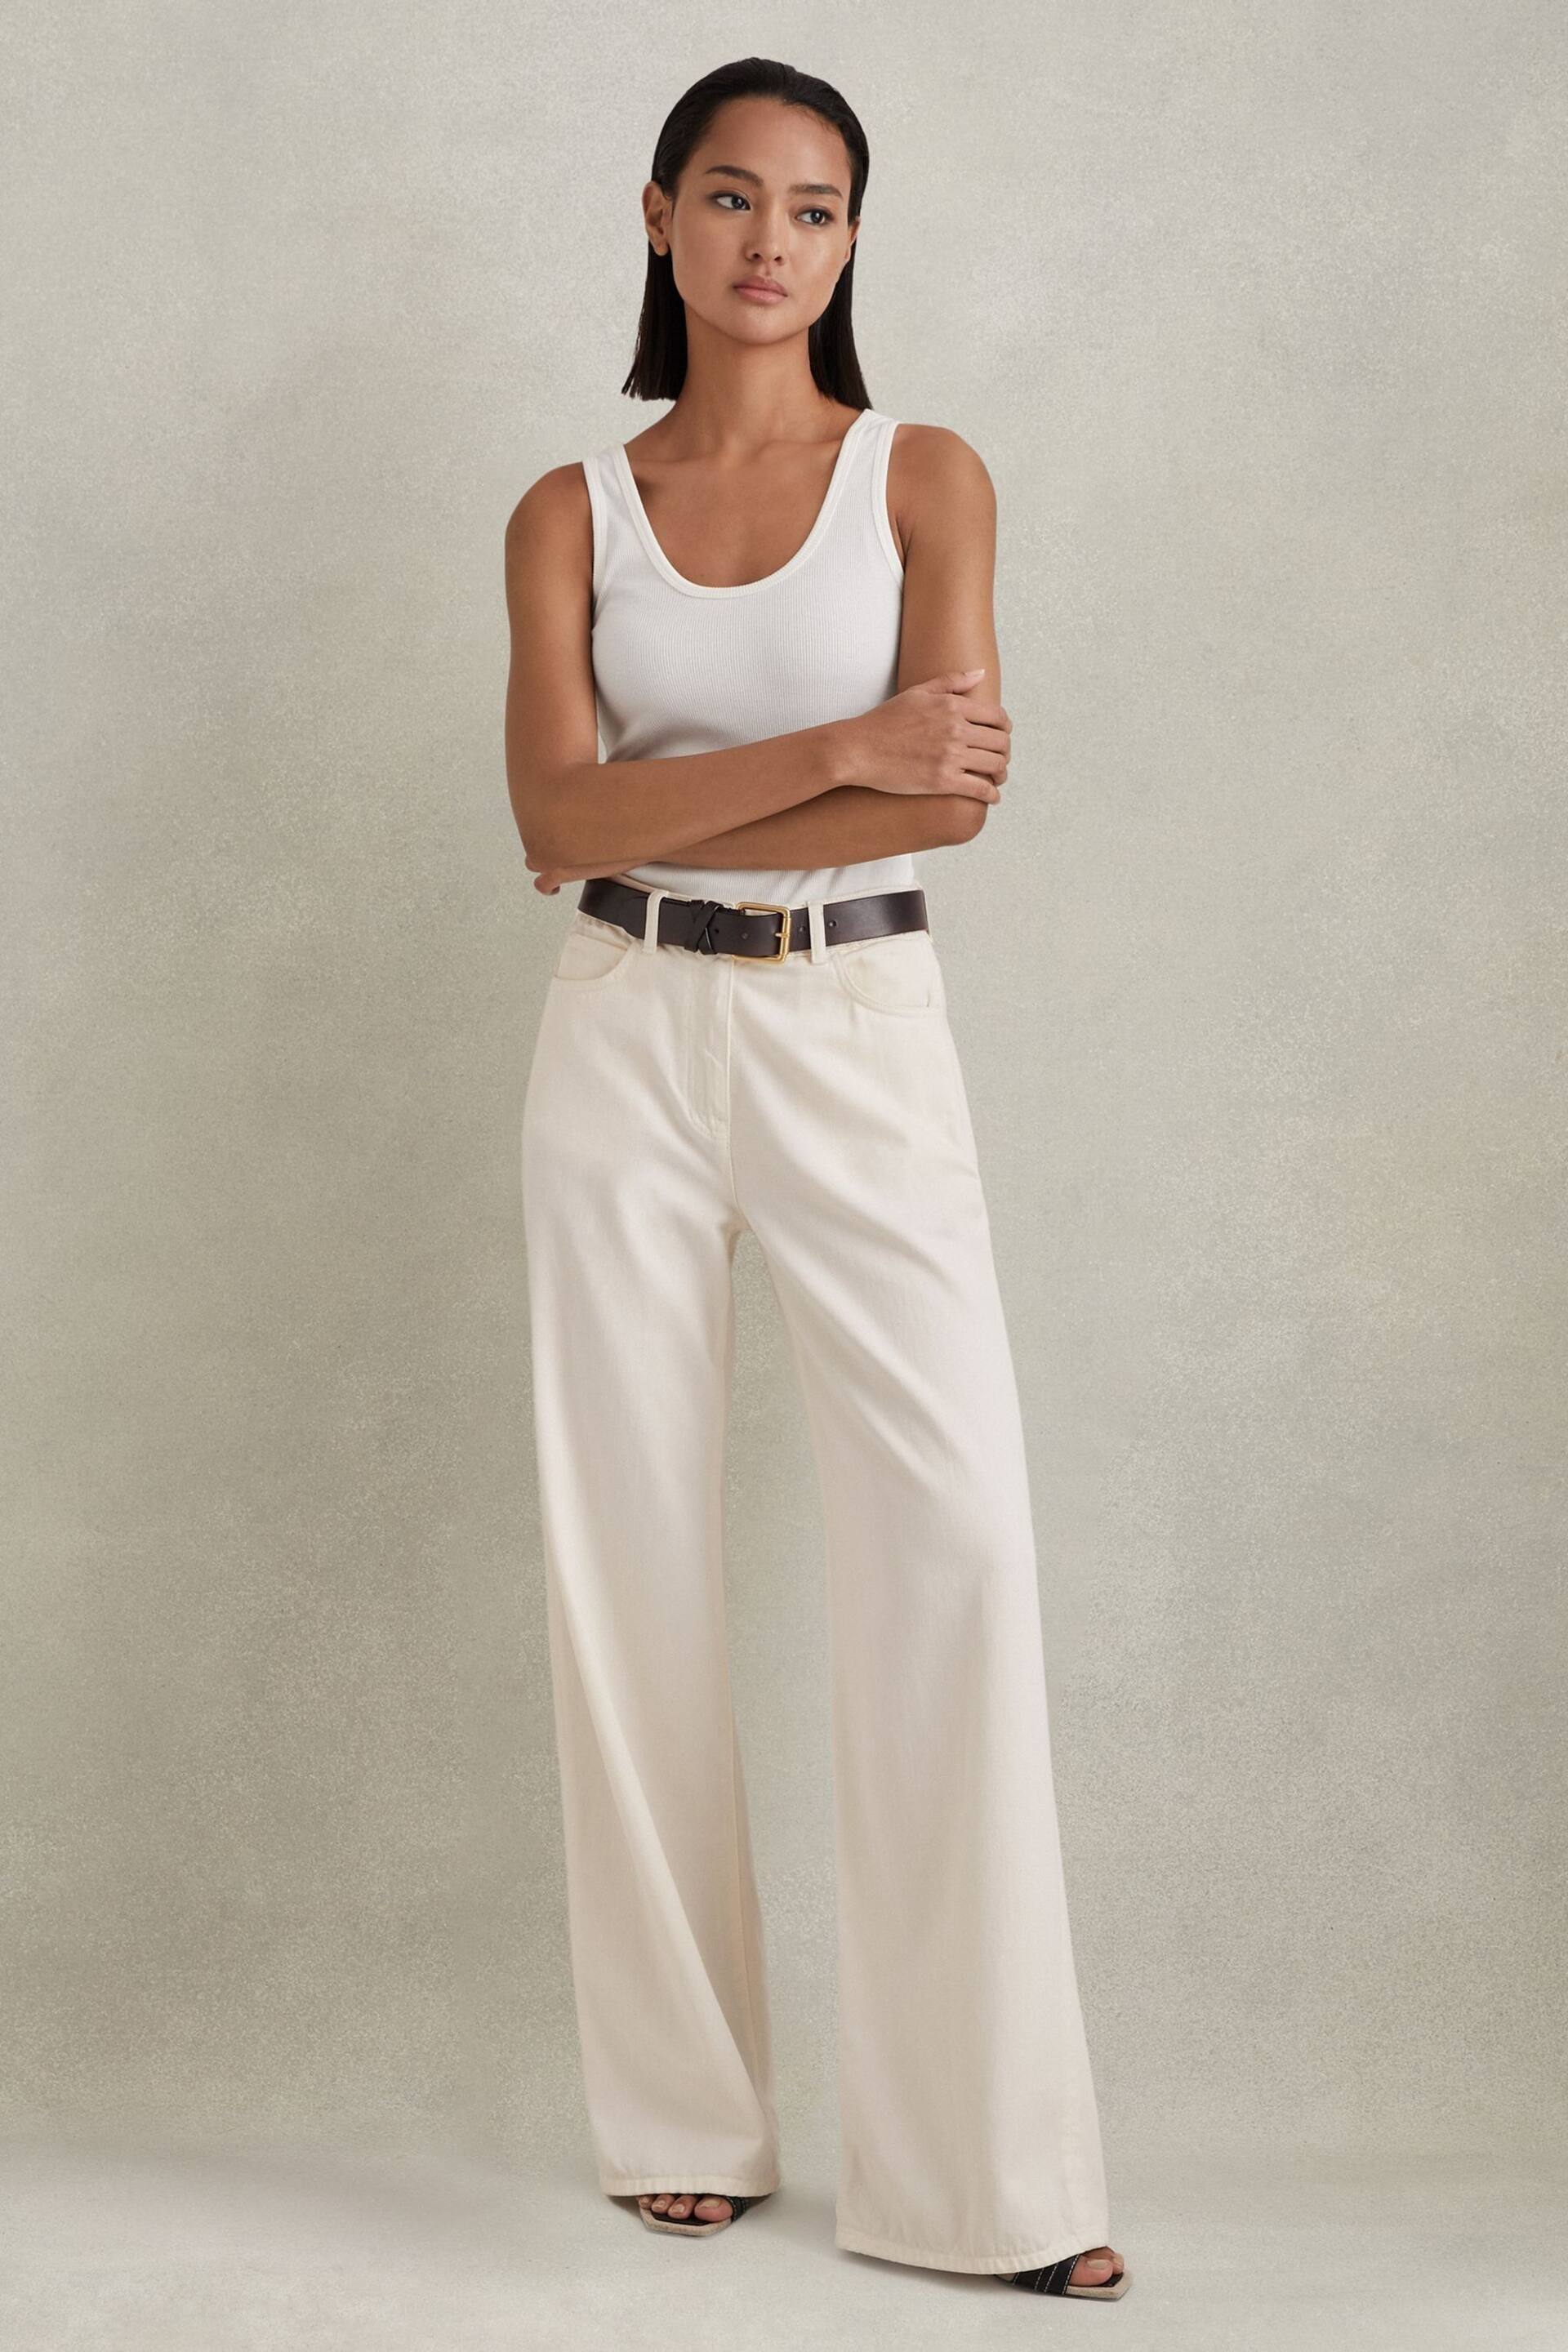 Reiss Cream Colorado Garment Dyed Wide Leg Trousers - Image 1 of 6